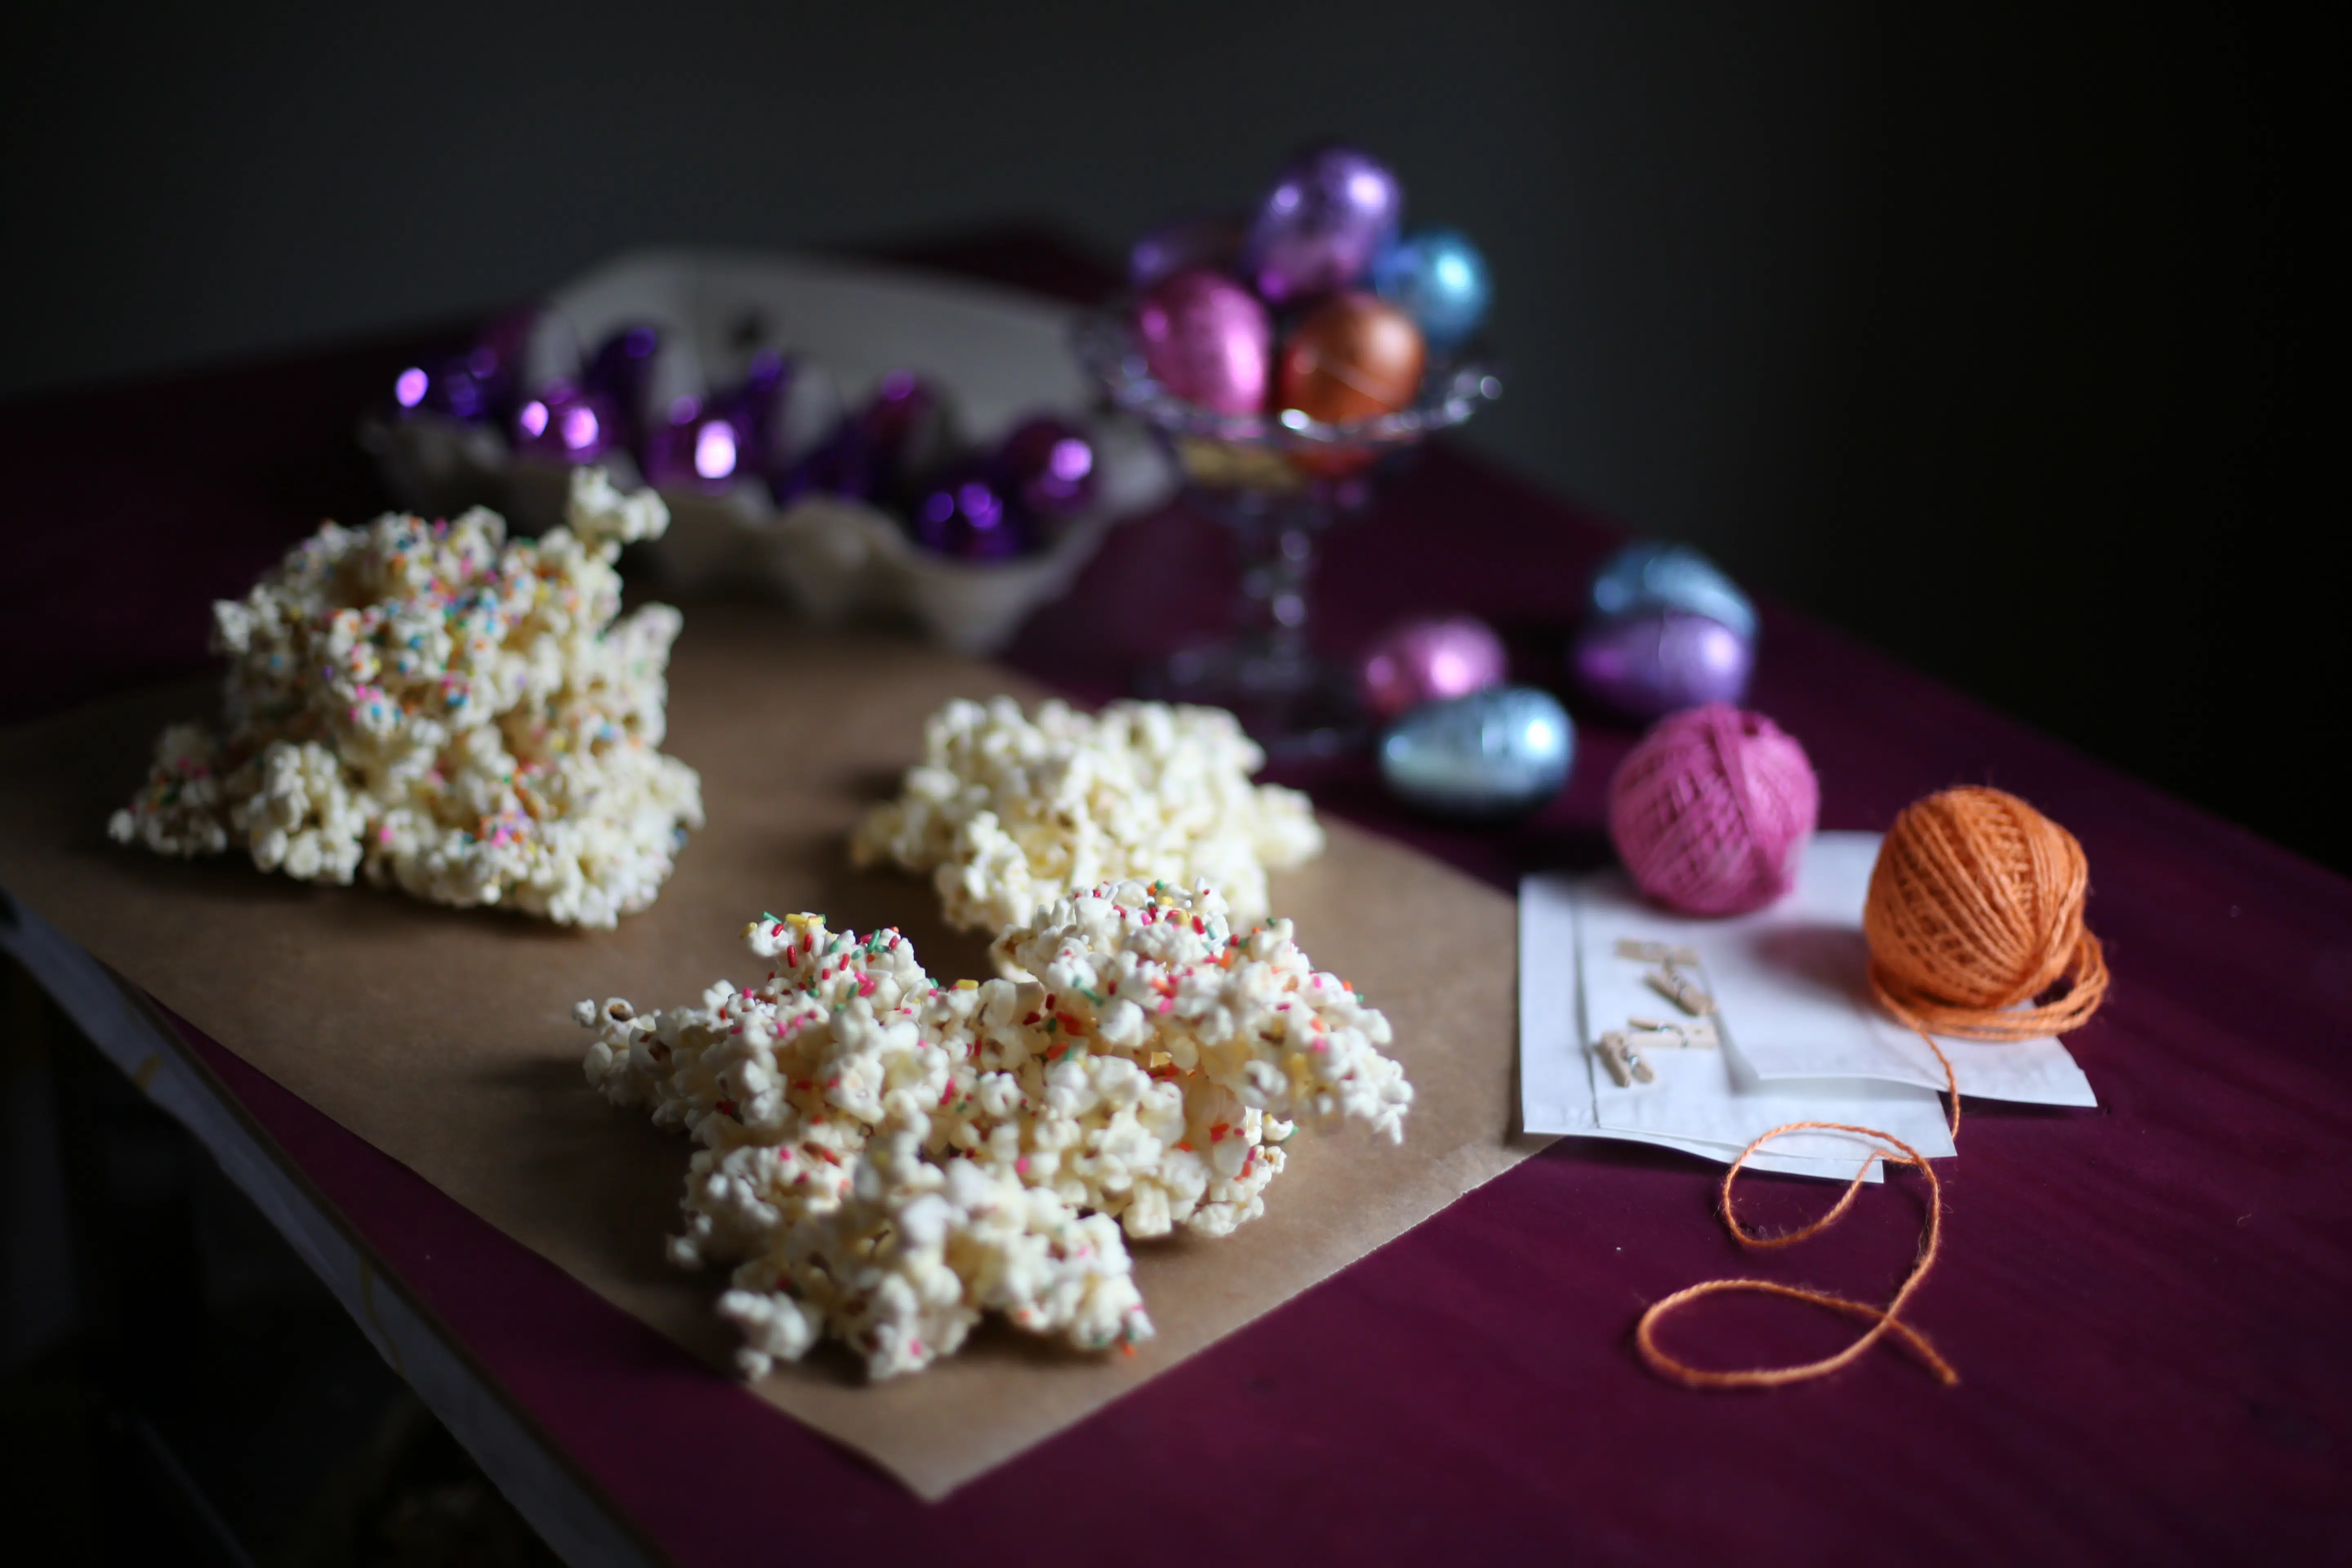 popcorn on a wooden table with decorations behind it 